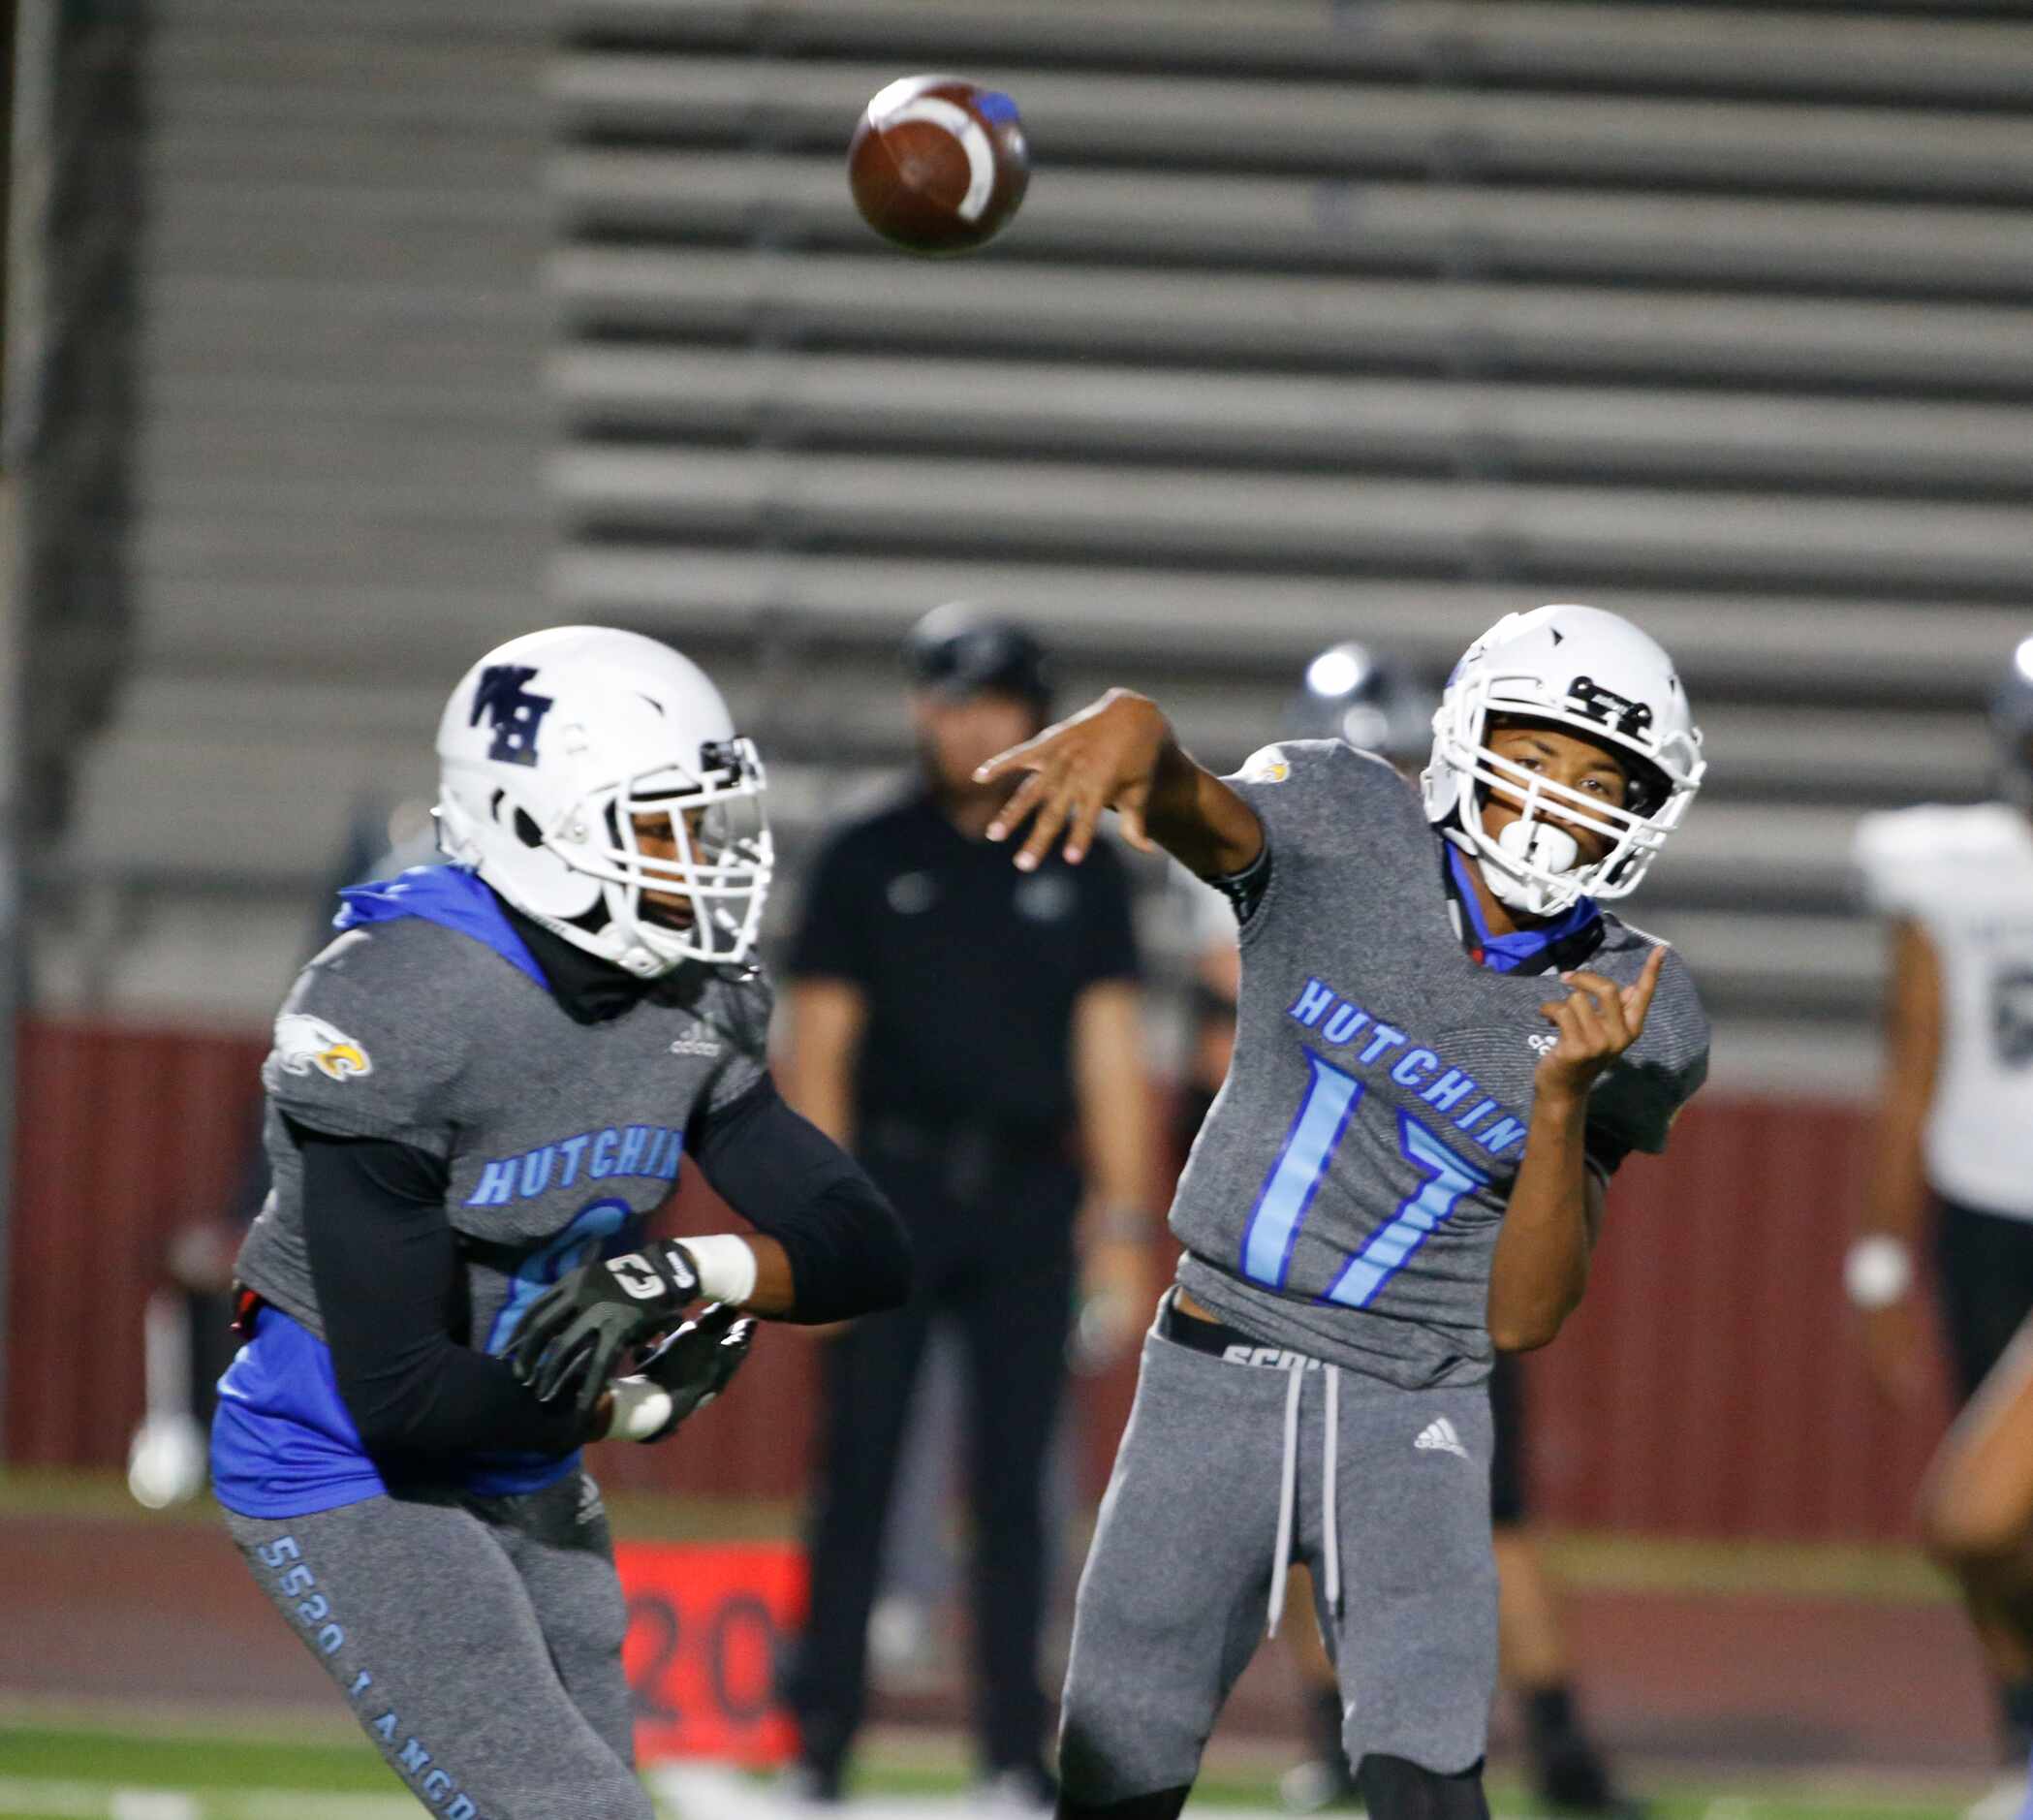 Wilmer-Hutchins QB TJ McMillion (17) throws a pass during the first half of a high school...